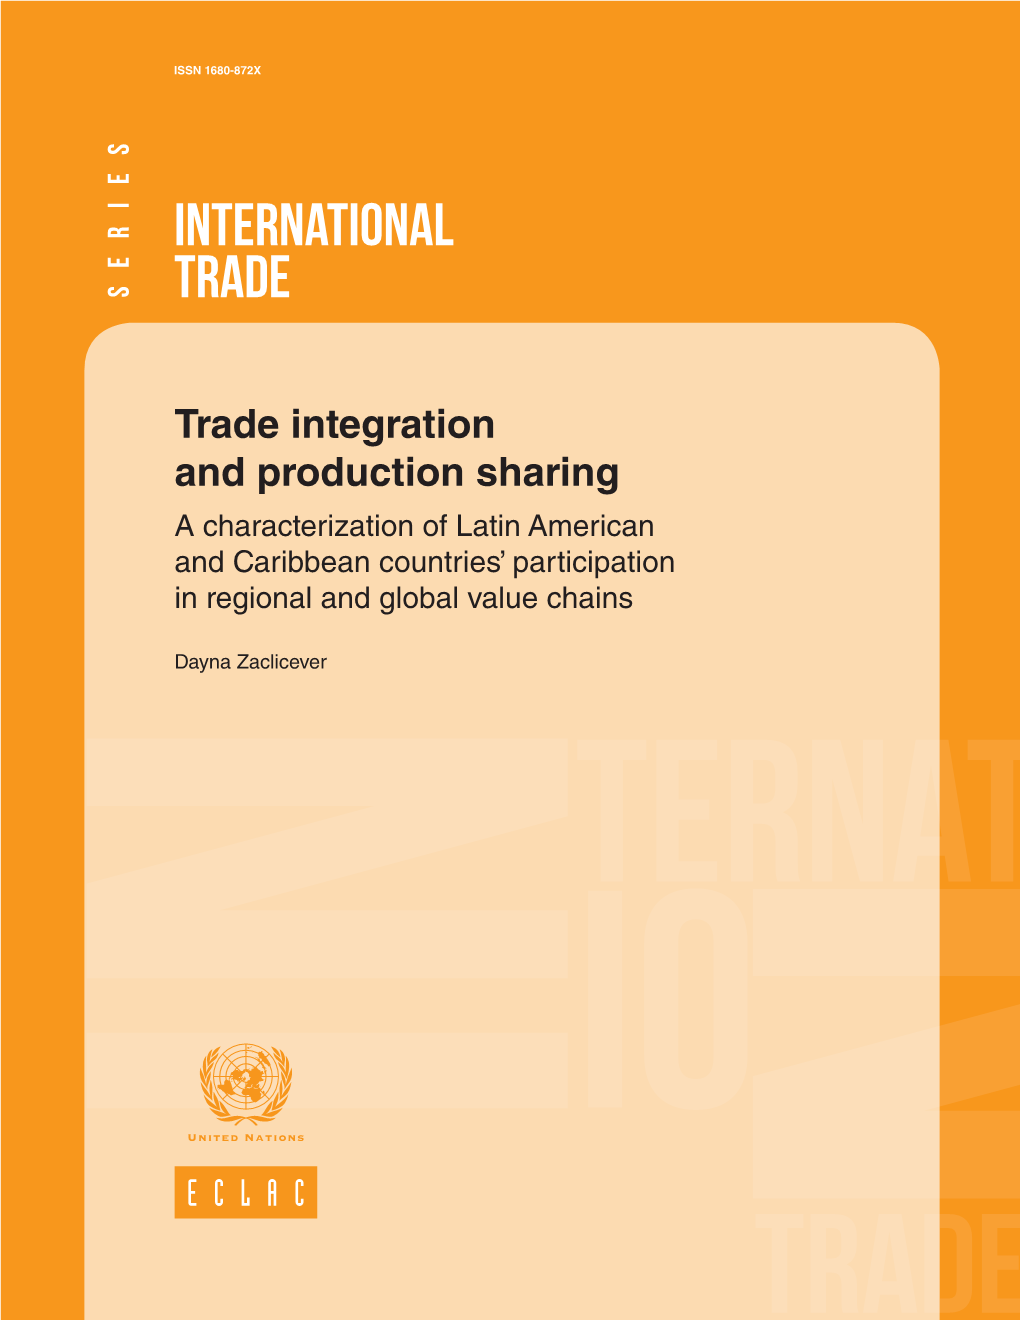 International Trade and Integration of the Economic Commission for Latin America and the Caribbean (ECLAC)